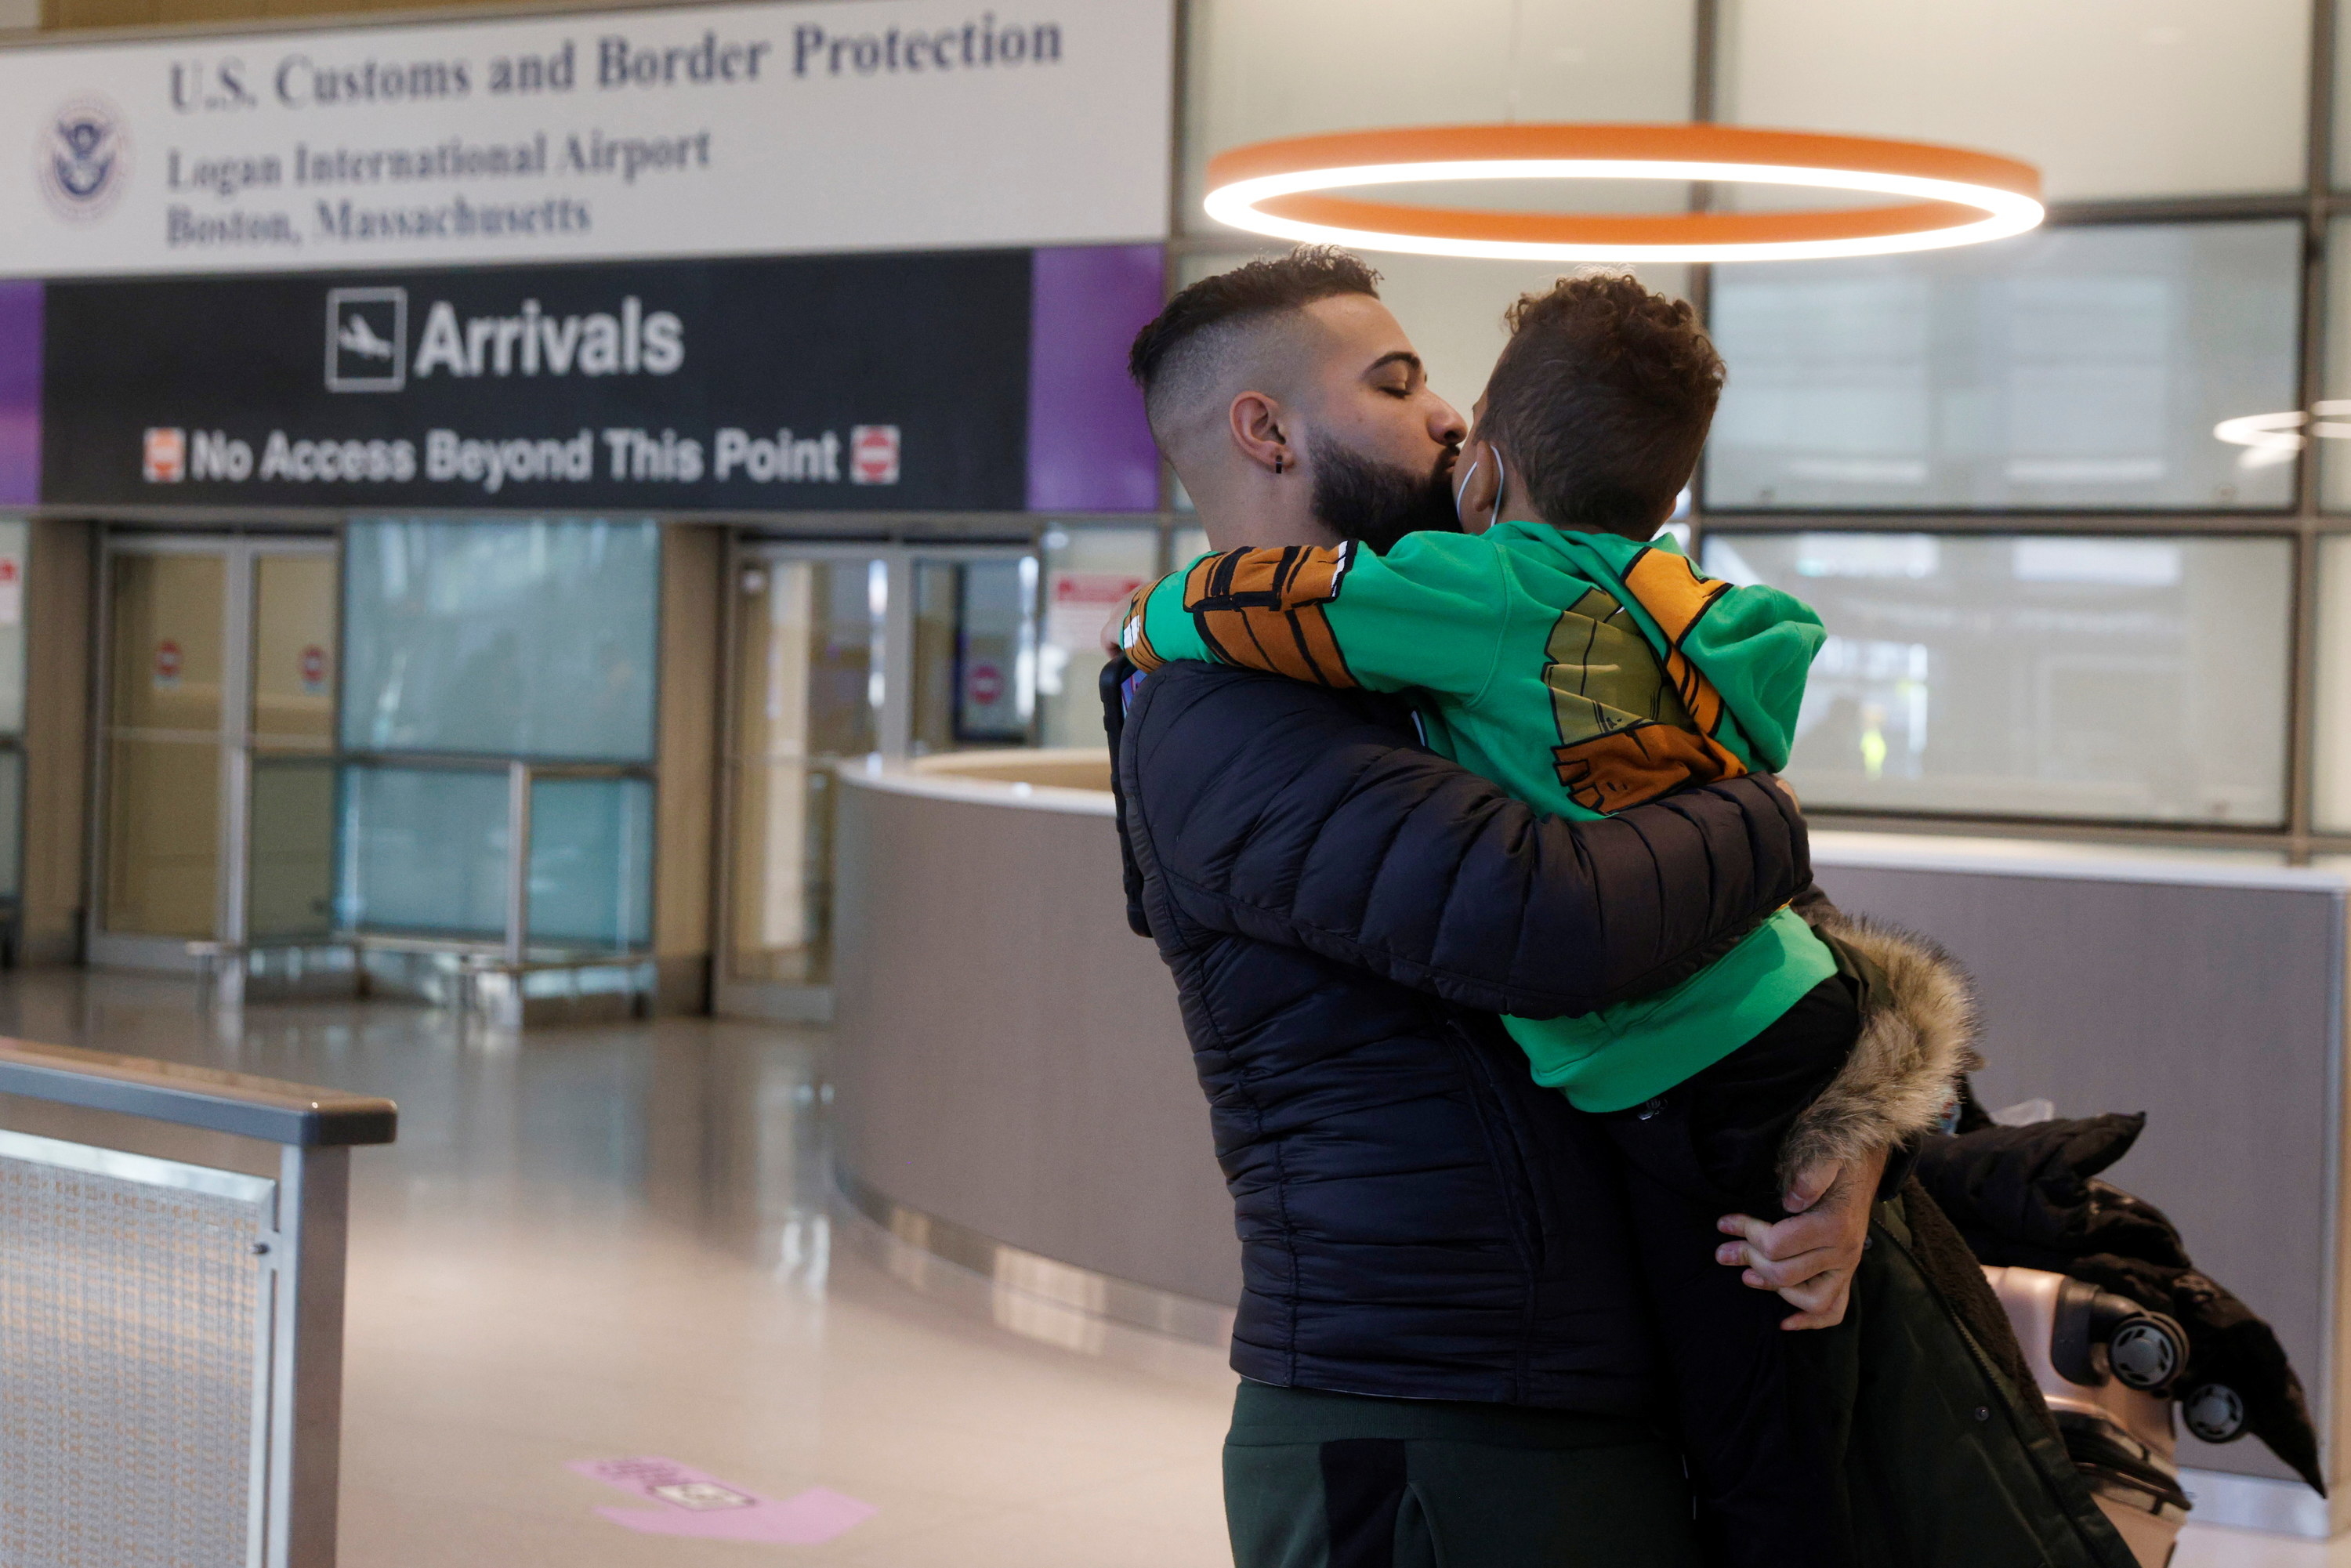 Daniel Guerrero hugs his 3-year-old son, Milan, after Milan arrived at Logan International Airport from the Dominican Republic on Nov. 8, 2021